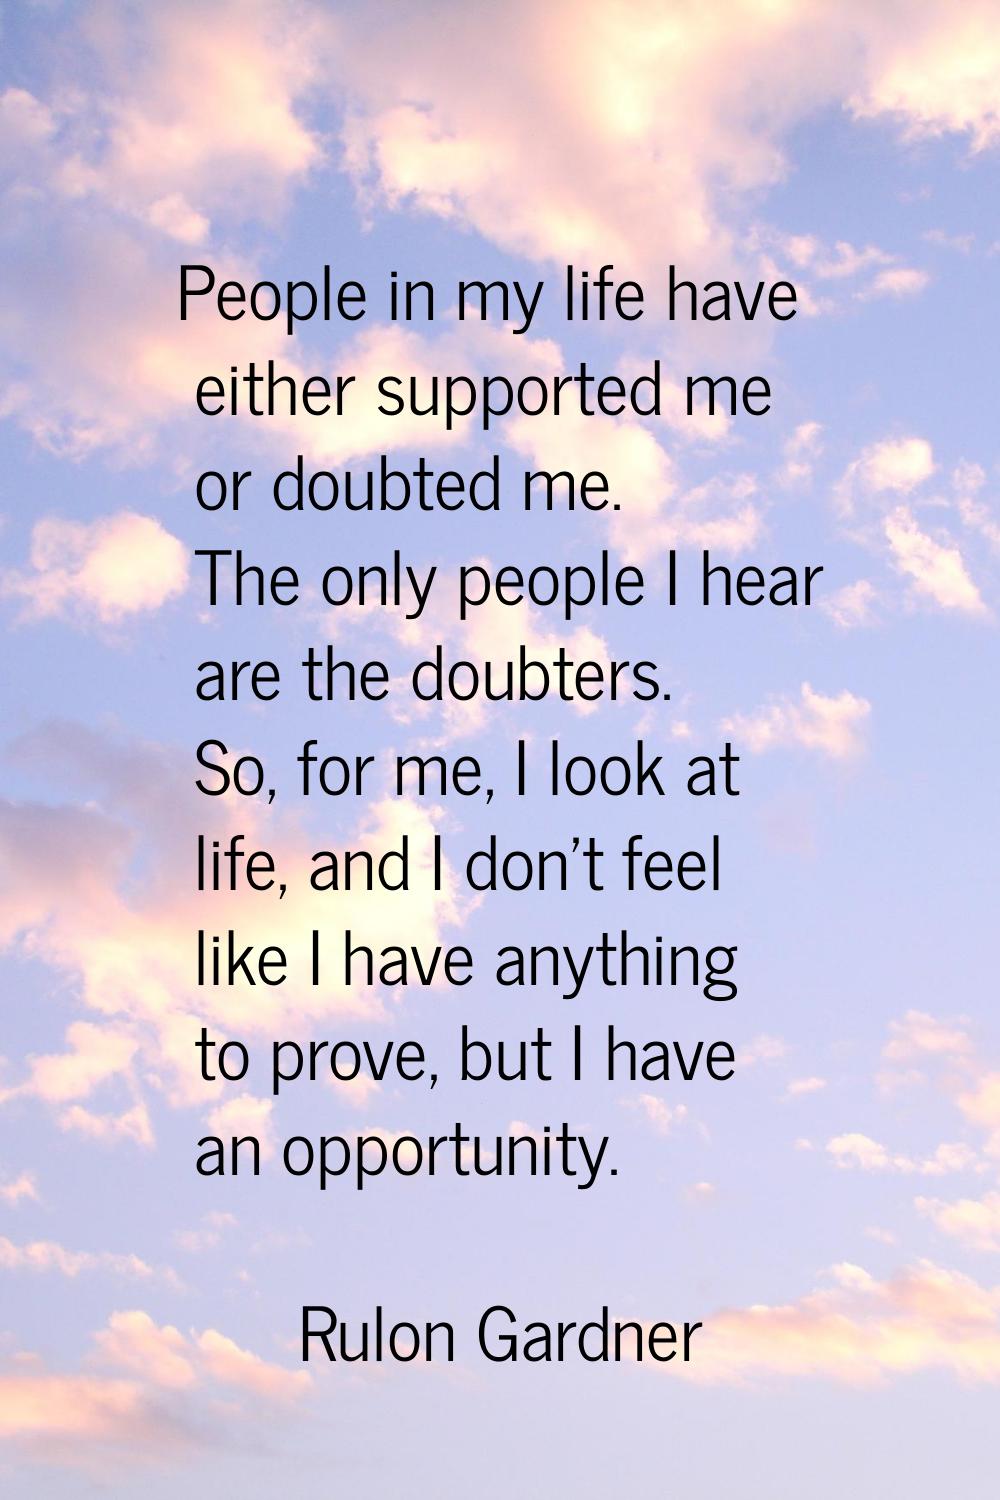 People in my life have either supported me or doubted me. The only people I hear are the doubters. 